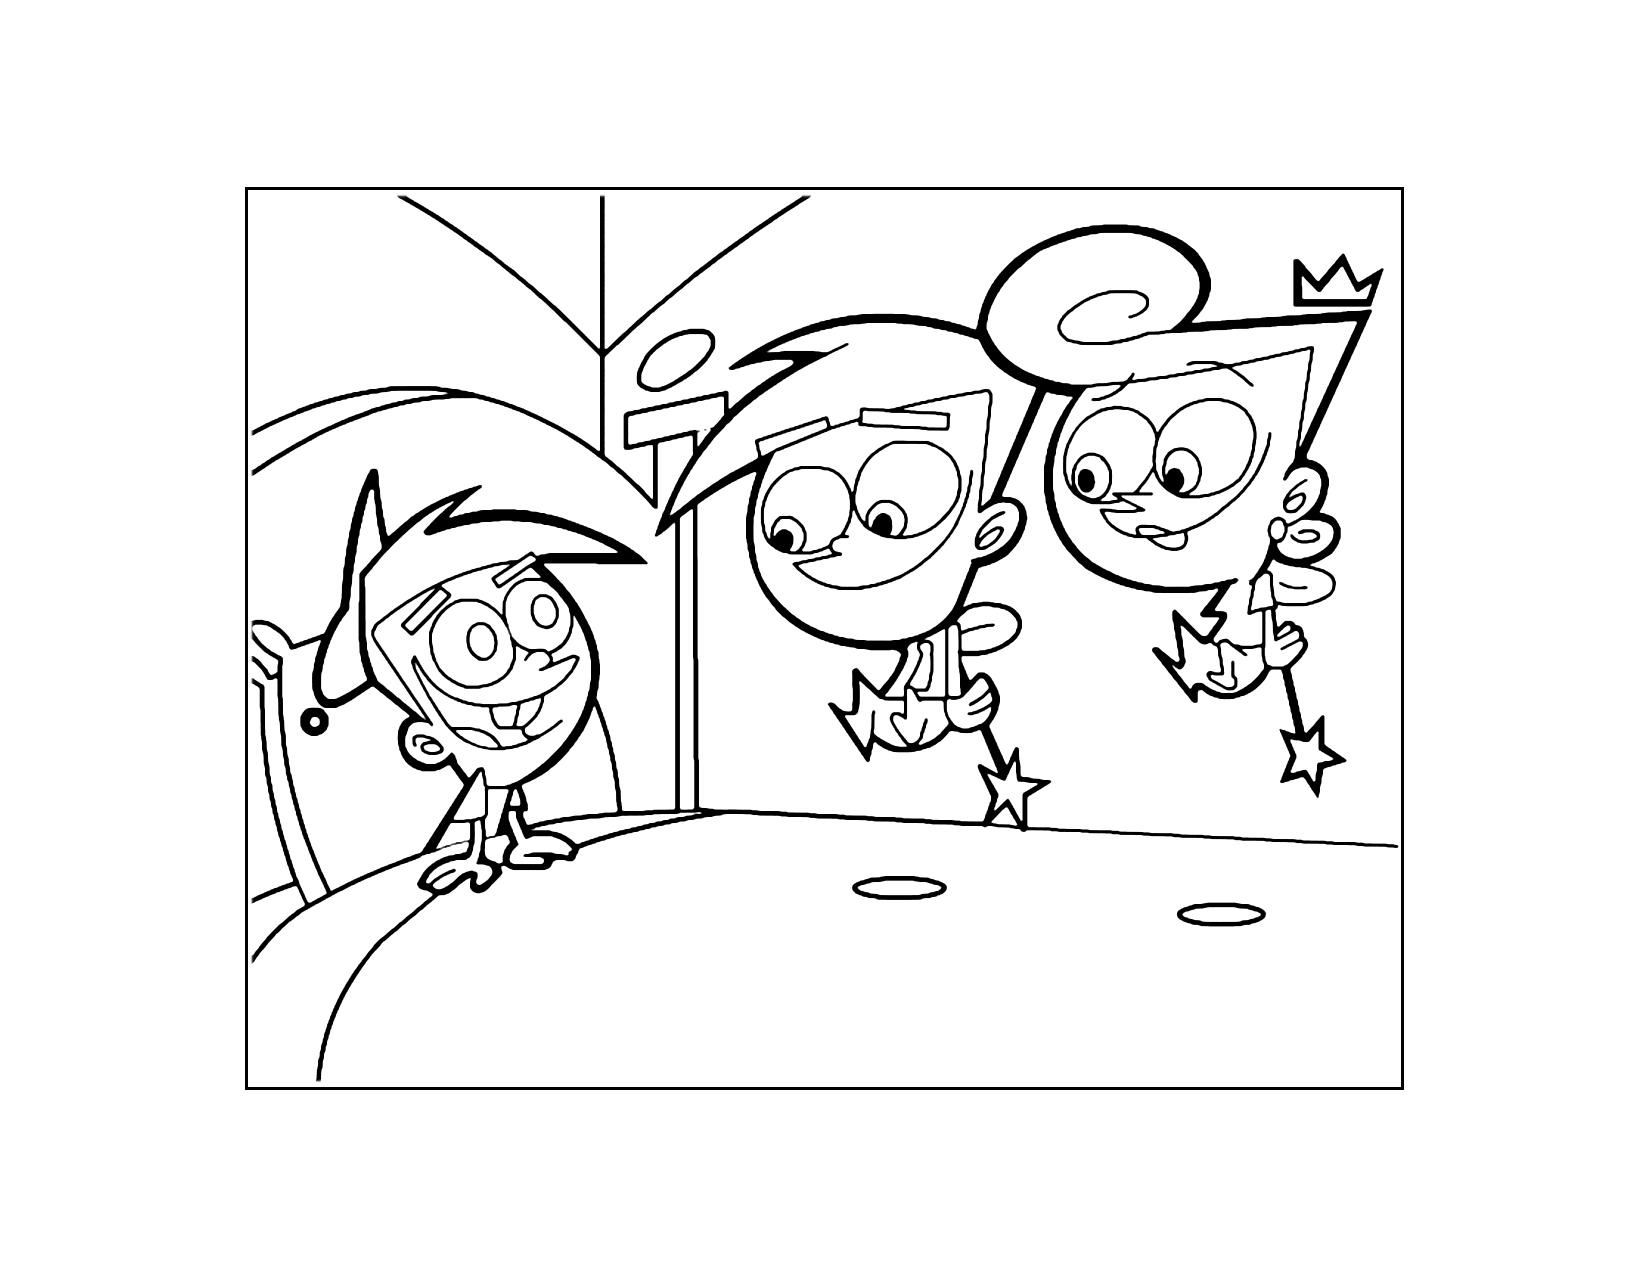 Cosmo Wanda And Timmy Fairly Odd Parents Coloring Page